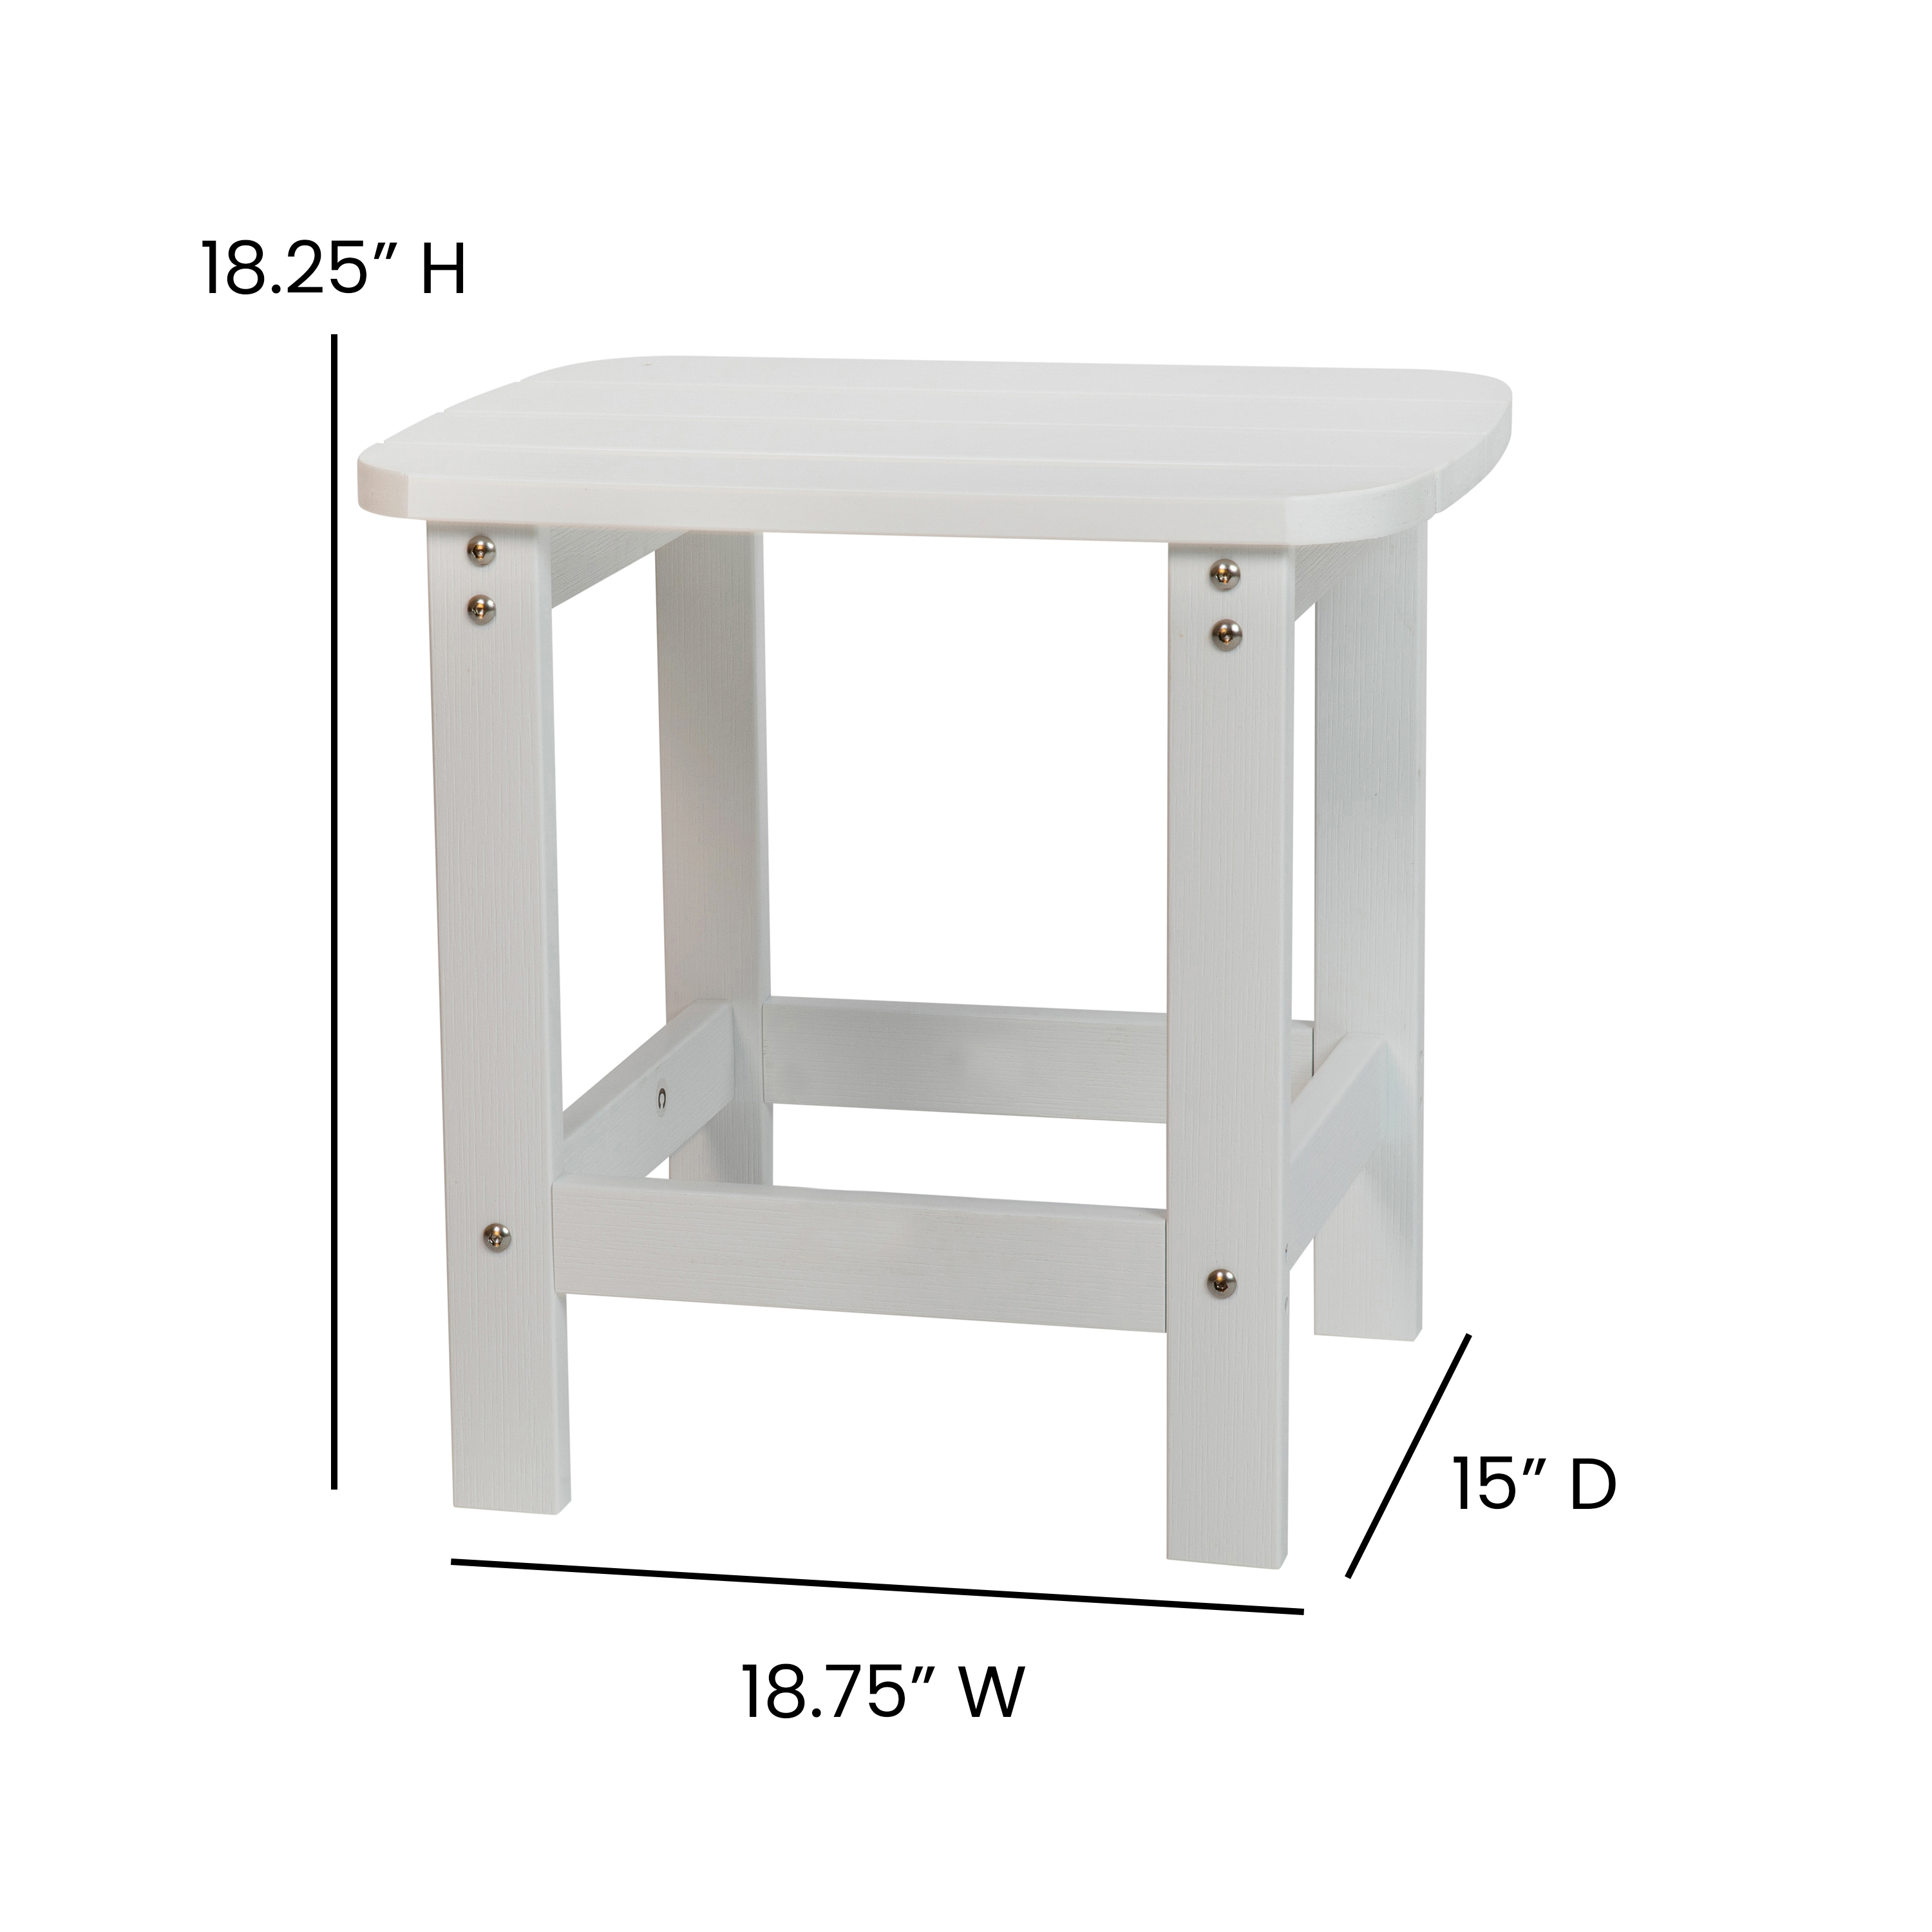 BizChair All-Weather Poly Resin Wood Commercial Grade Adirondack Side Table in White - image 5 of 9